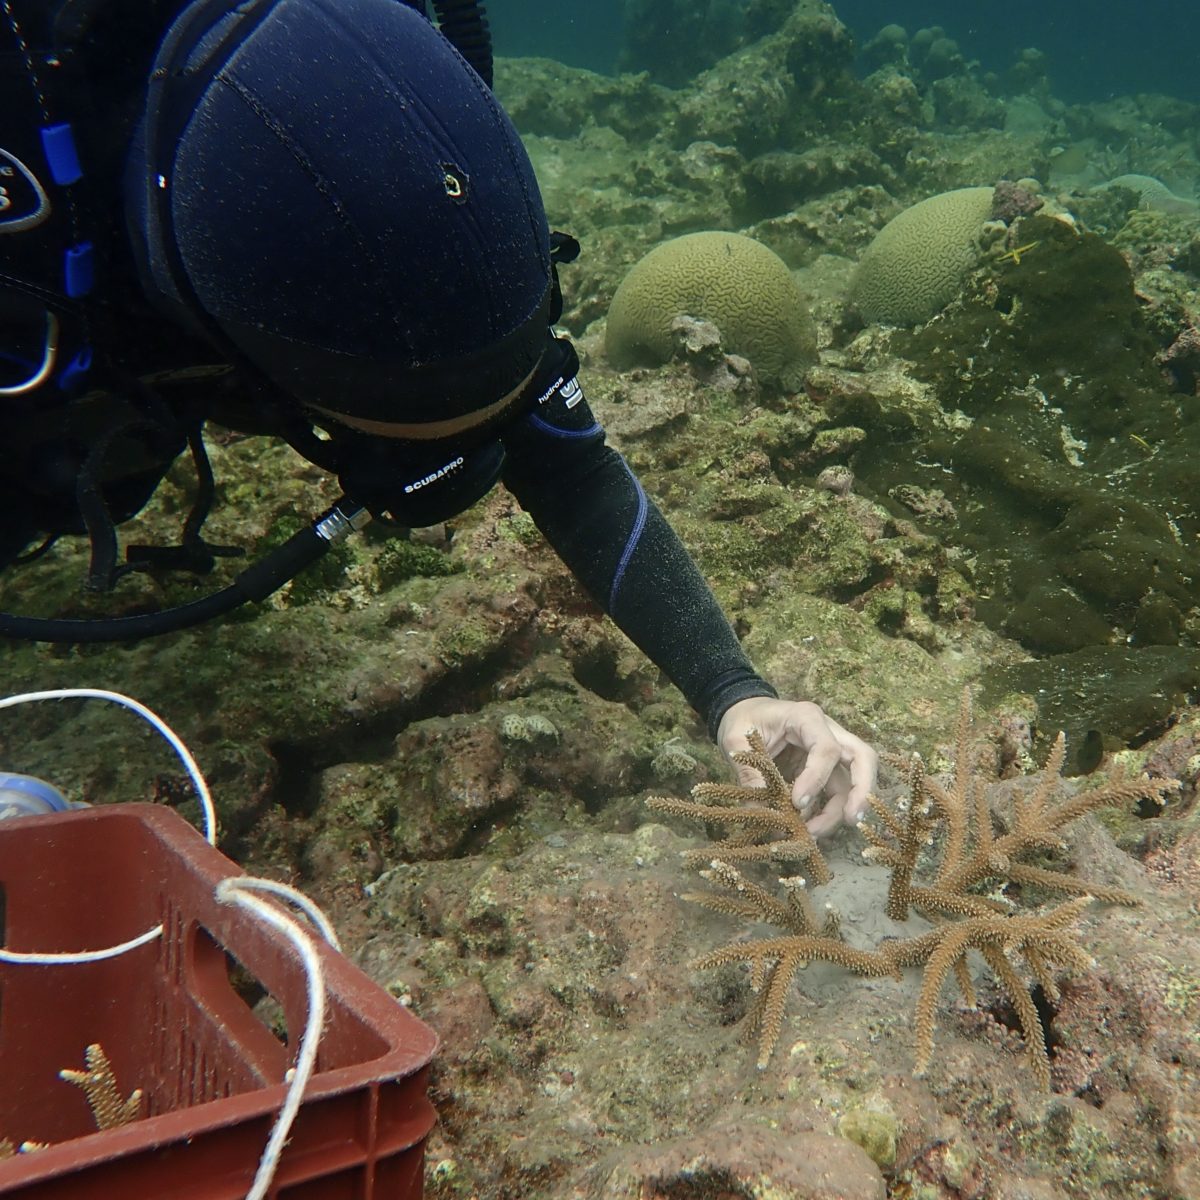 Outplanting corals is one of the most important parts of any coral restoration project. PC: Felipe Muñoz